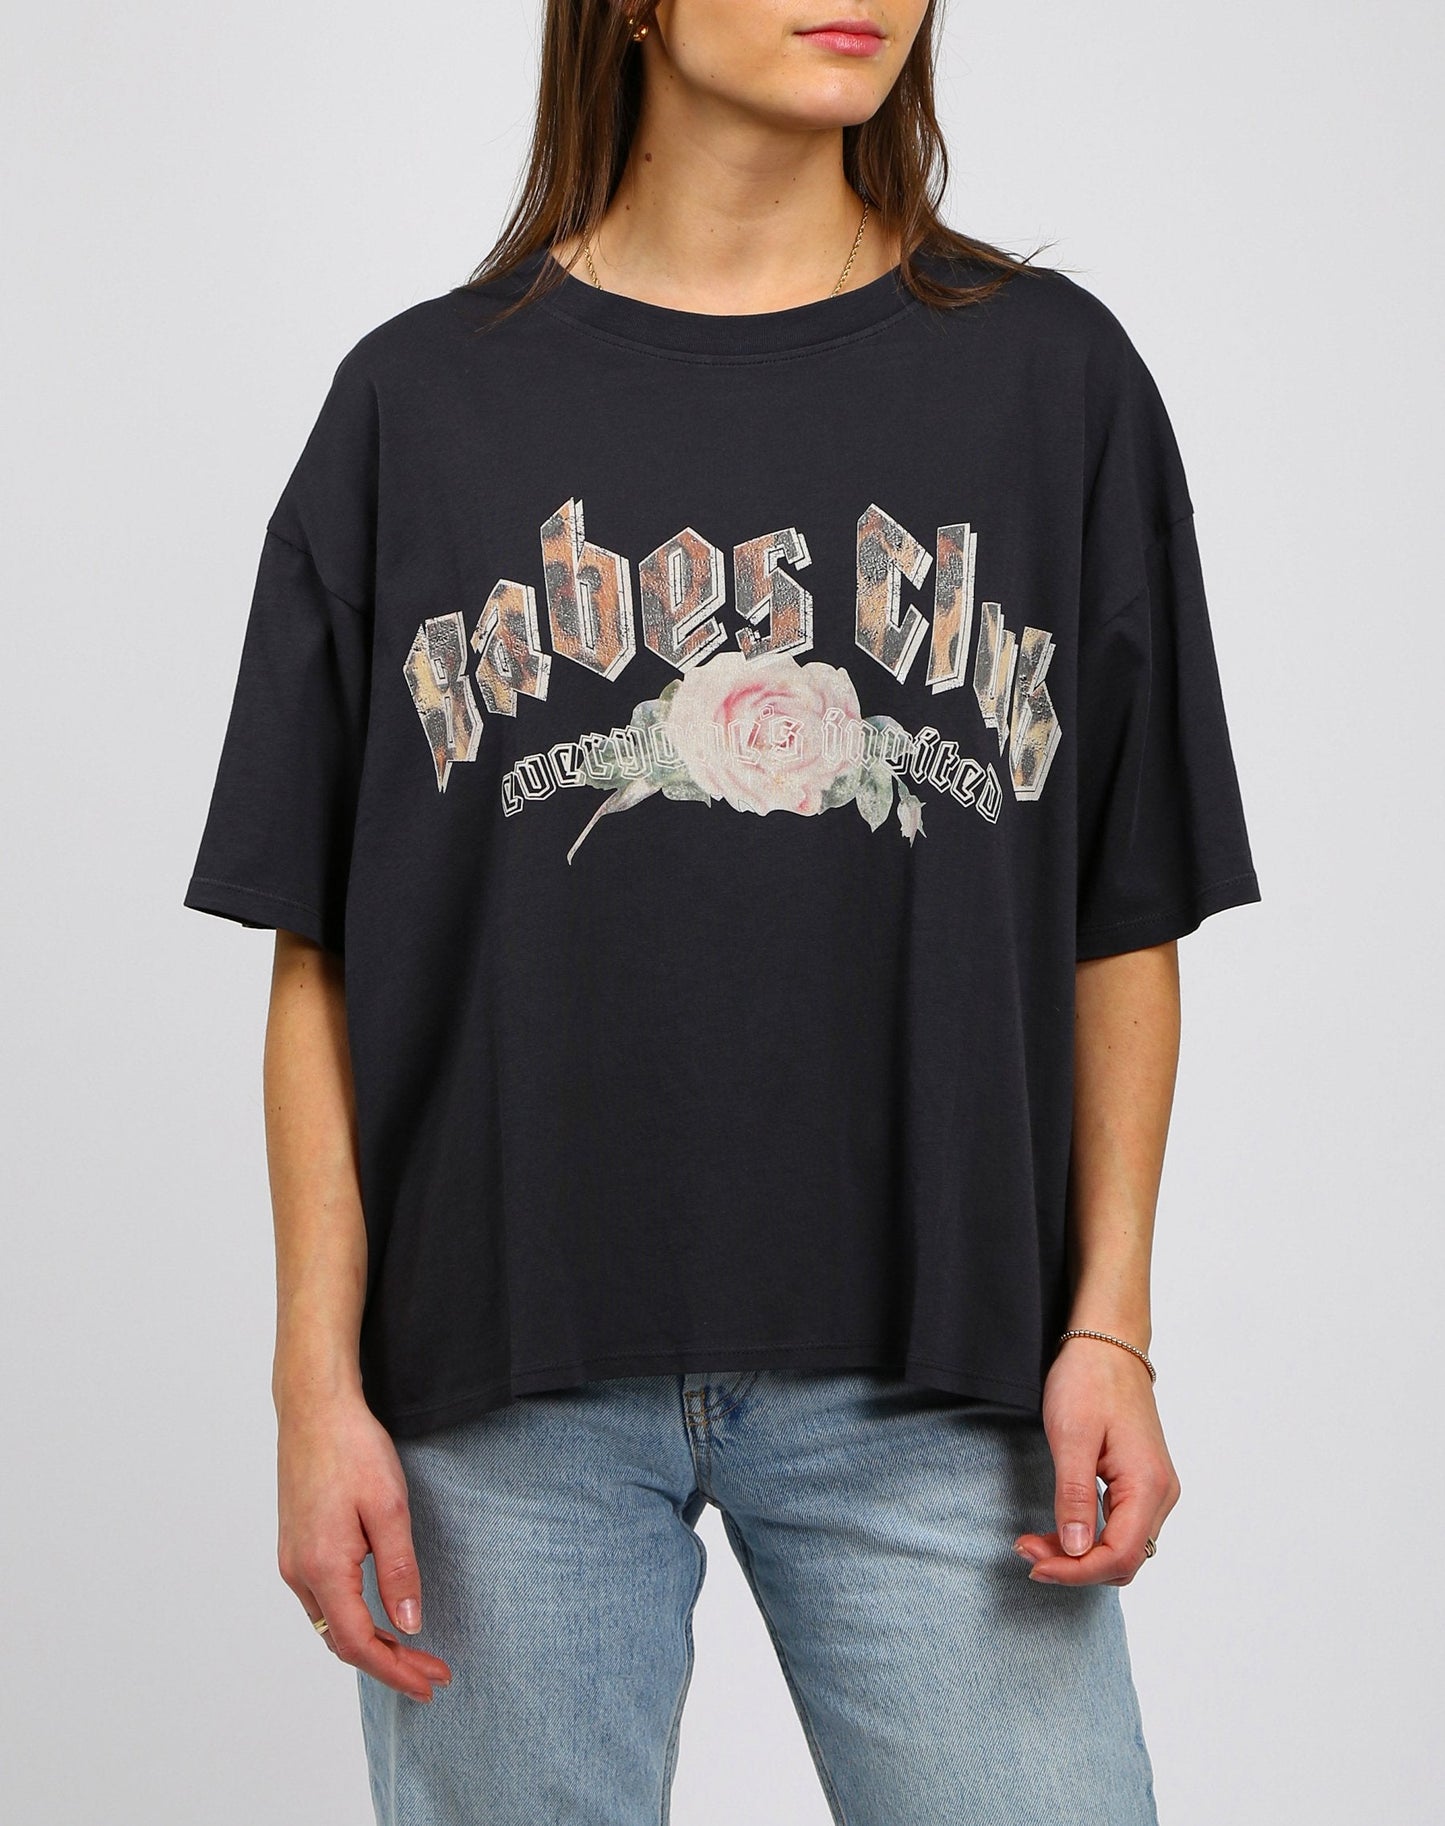 Babes Club Rosy Tee Brunette The Label